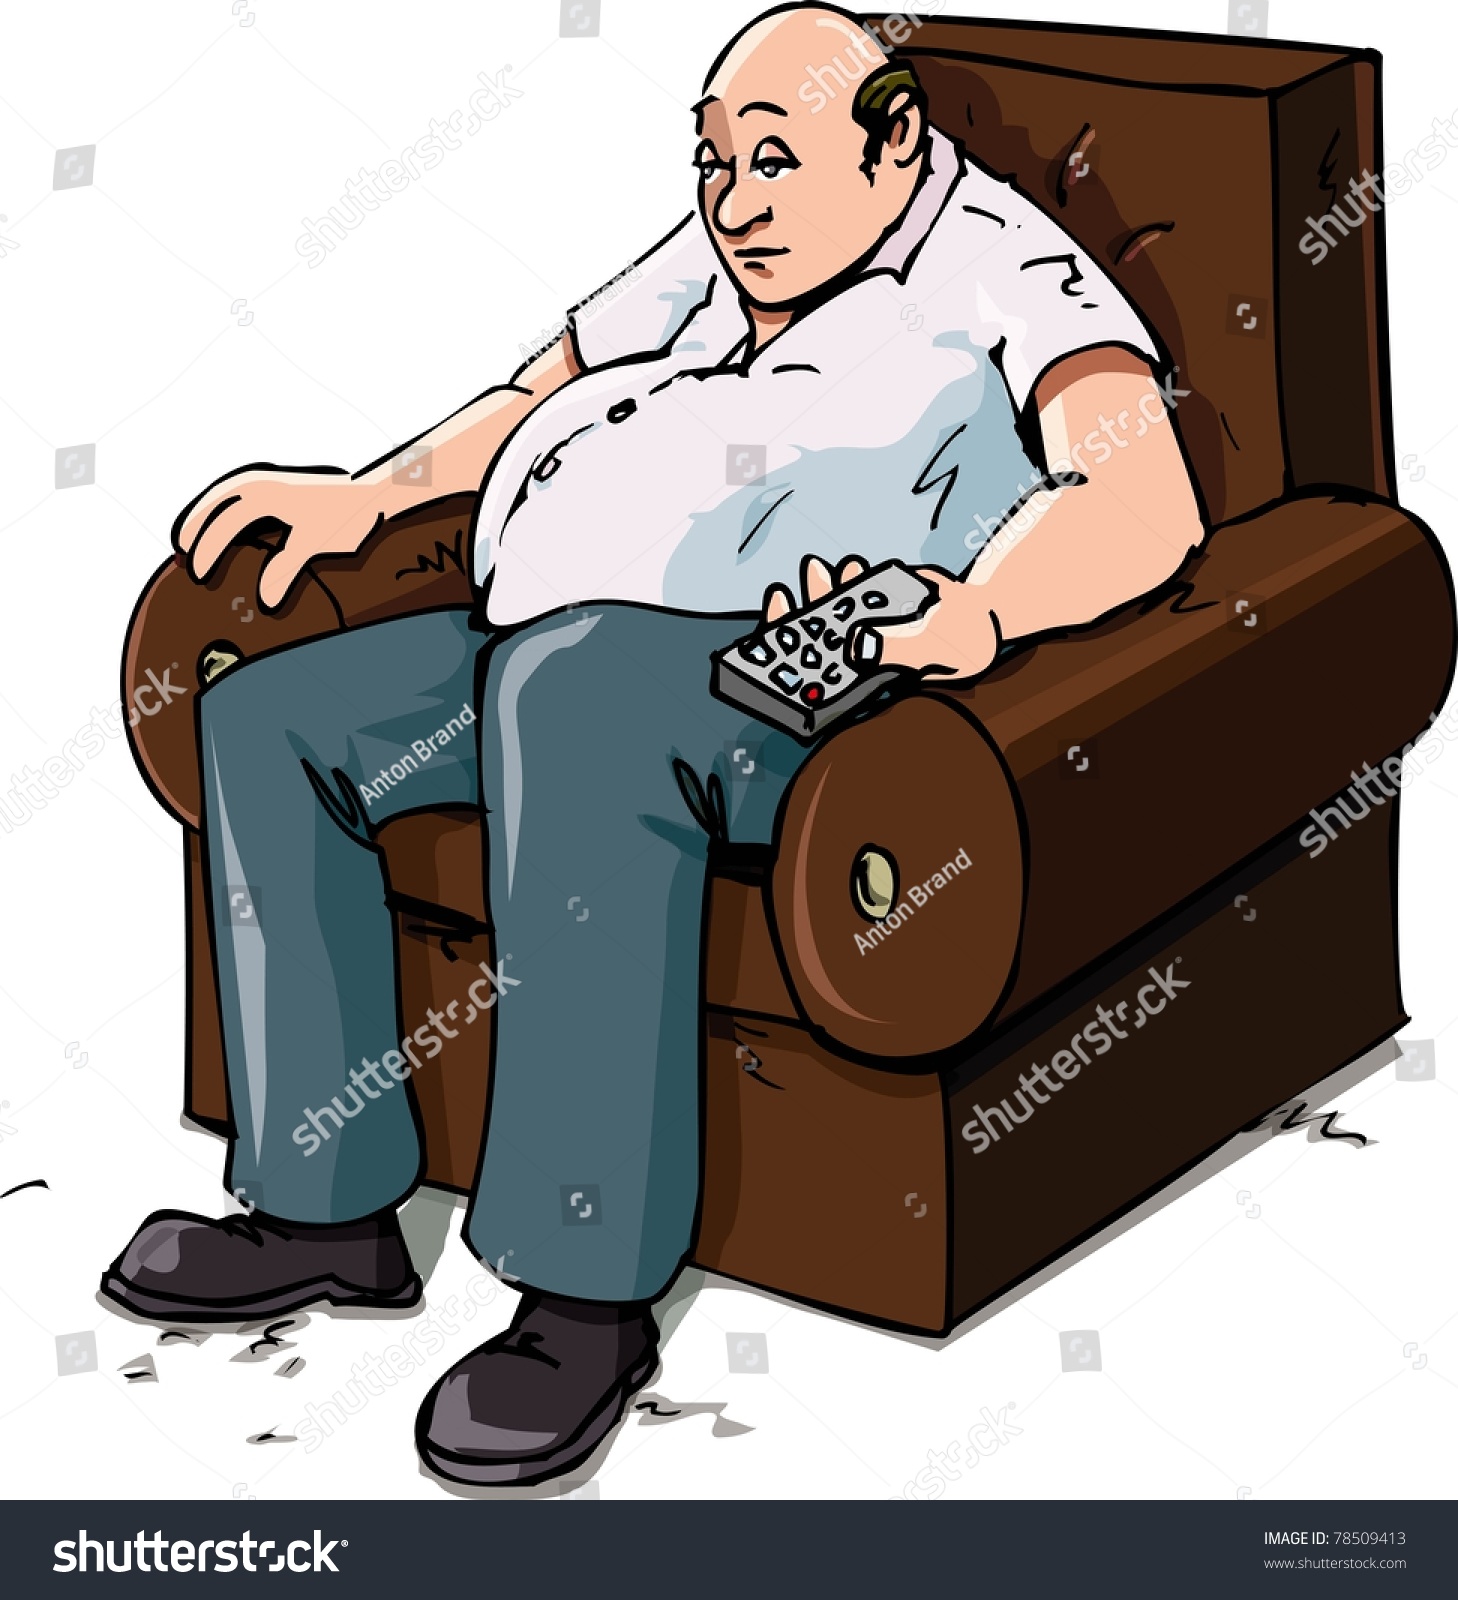 Cartoon Couch Potato On Chair Isolated Stock Vector Royalty Free 78509413